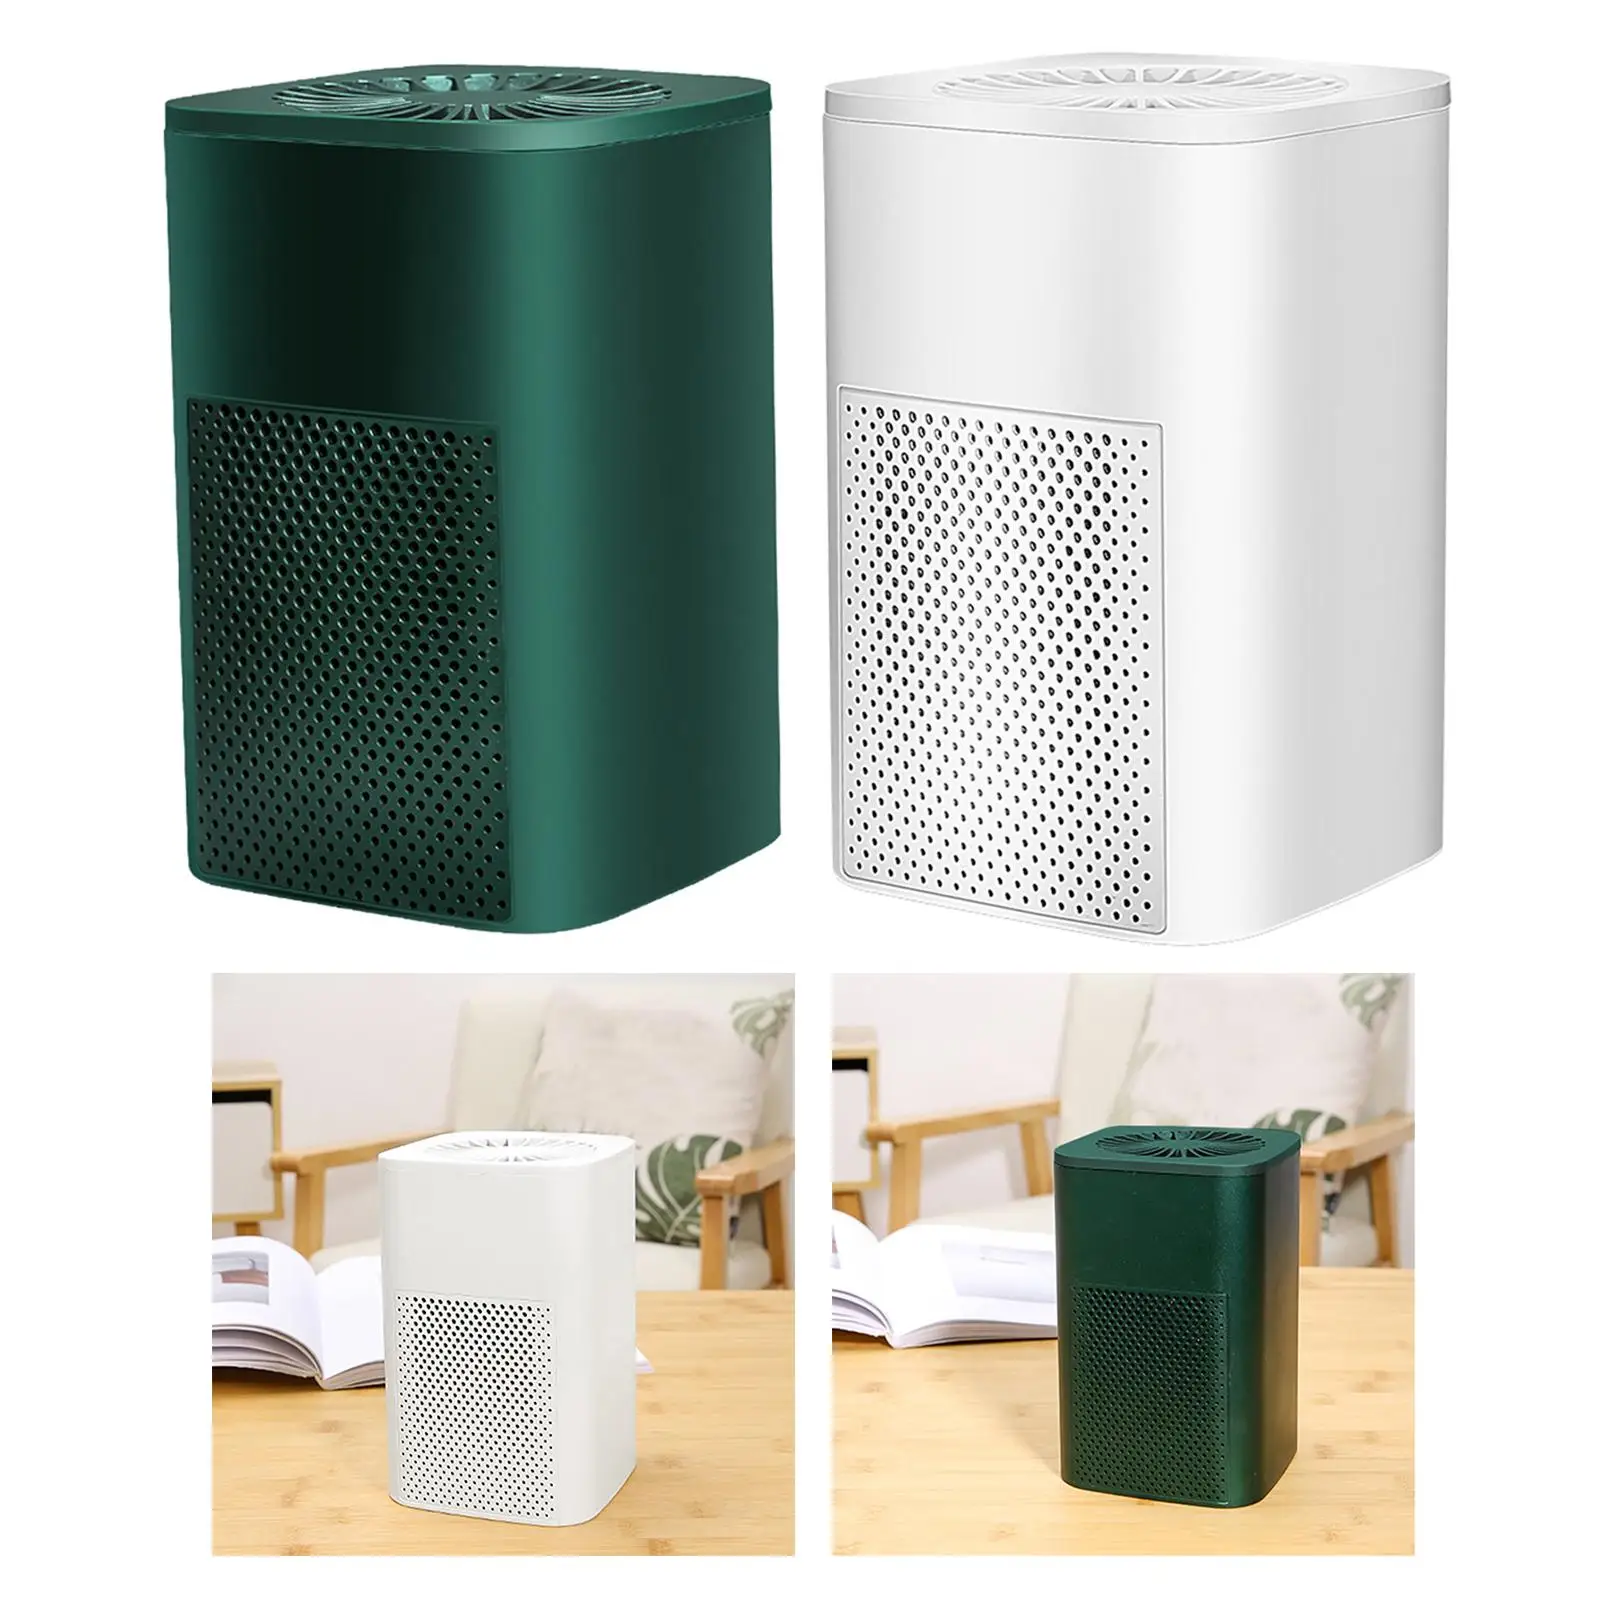 Portable Mini Air Purifier 2 Layer Activated Carbon Quiet Office PM2.5 Monitor Air Cleaner Removes CO2 Odor Pet Allergies Dust